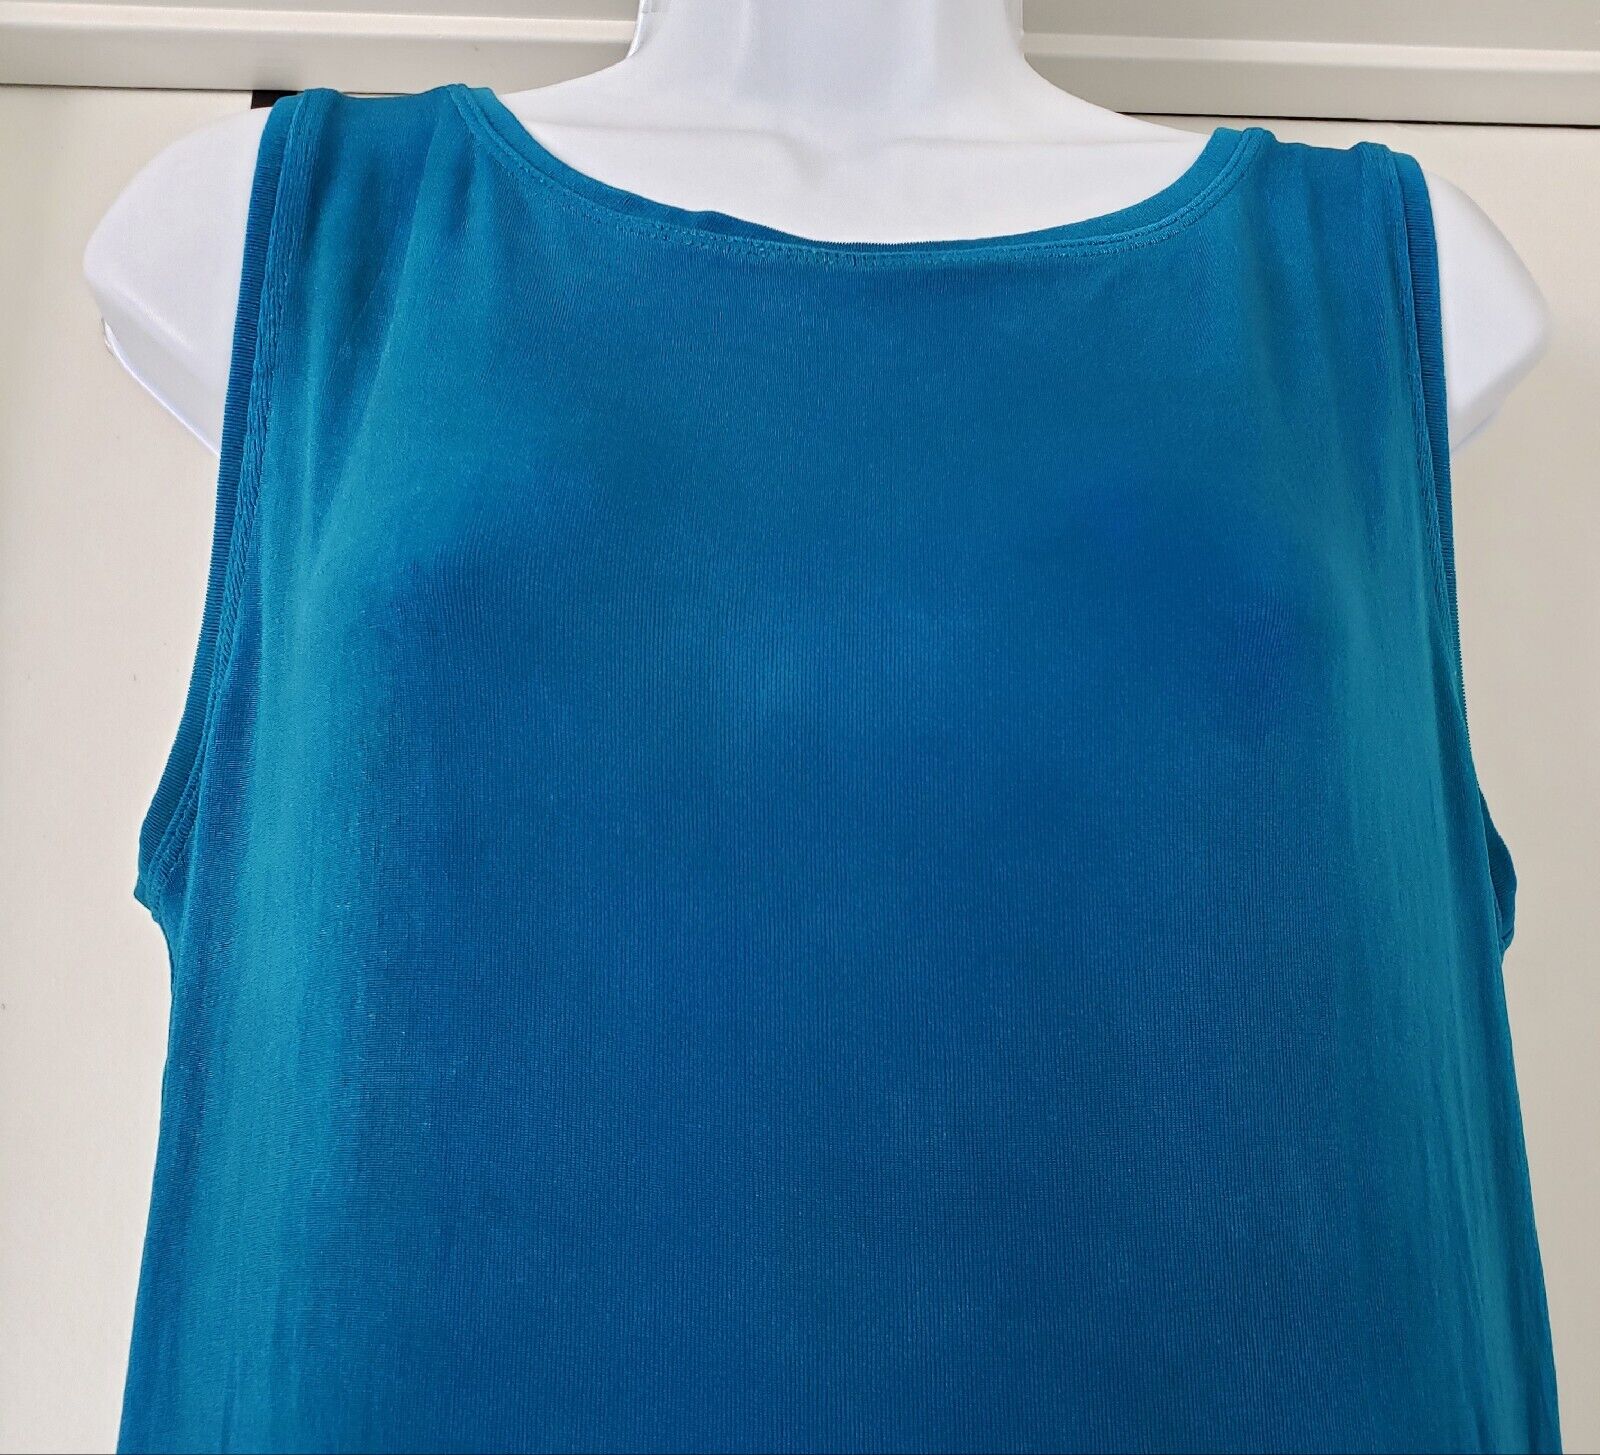 Chico's Travelers Top Tank Size 2 L Bright Blue Stretch Slinky ...